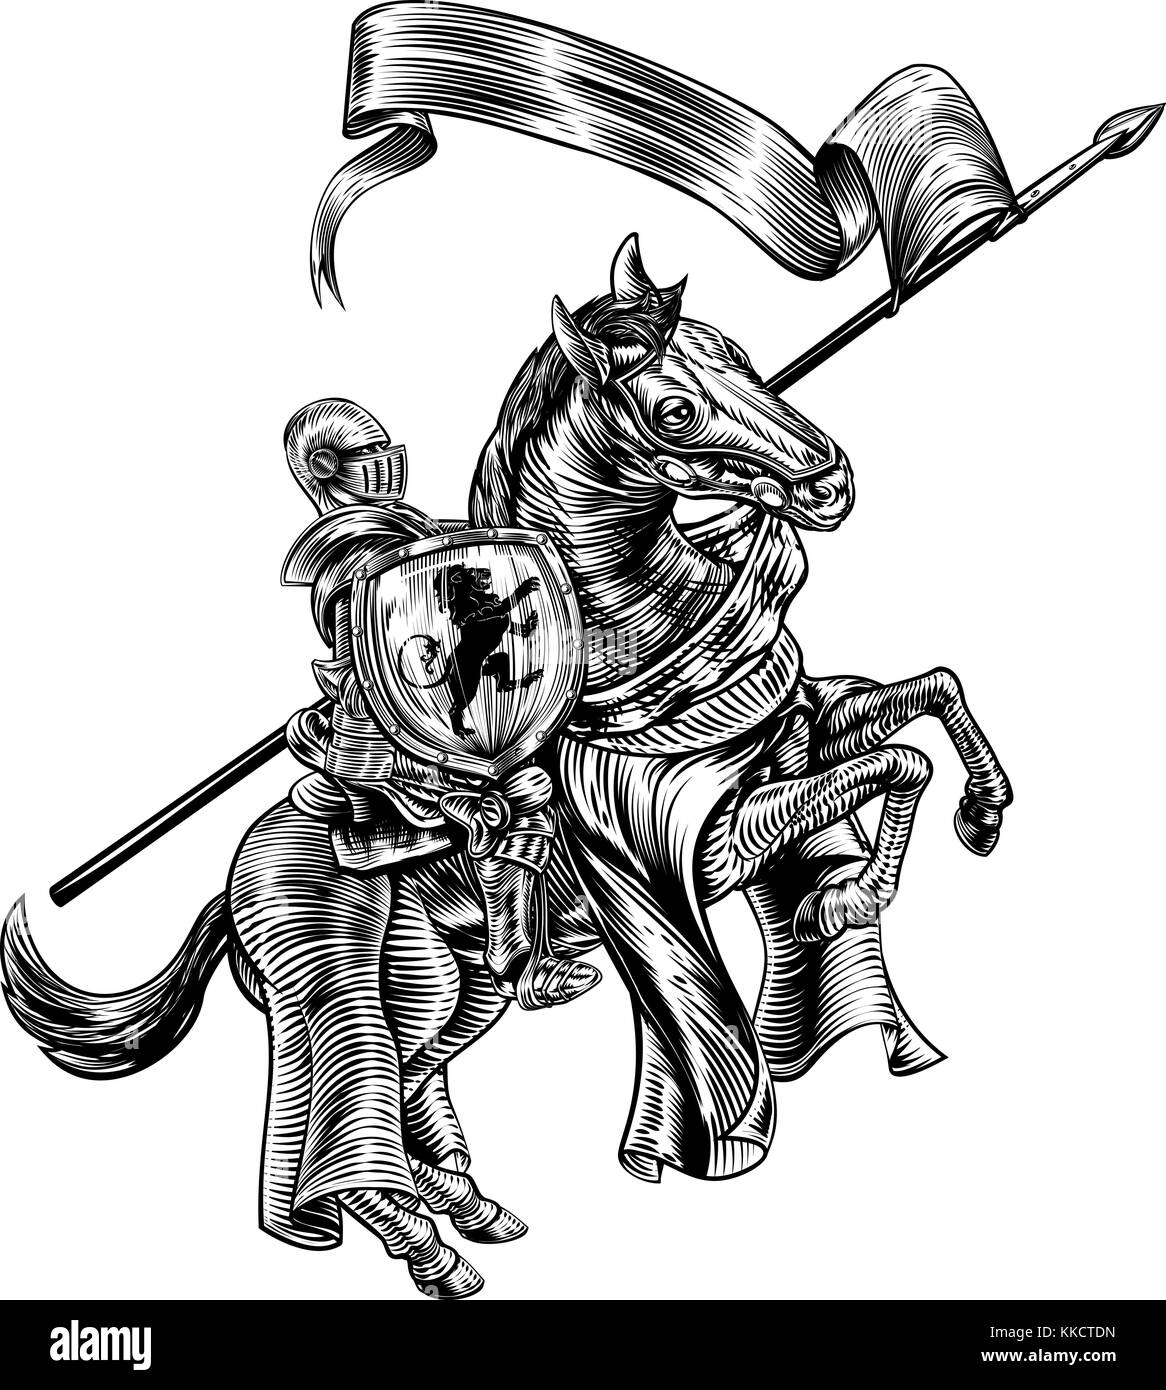 Medieval Knight on Horse Vintage Woodcut Style Stock Vector